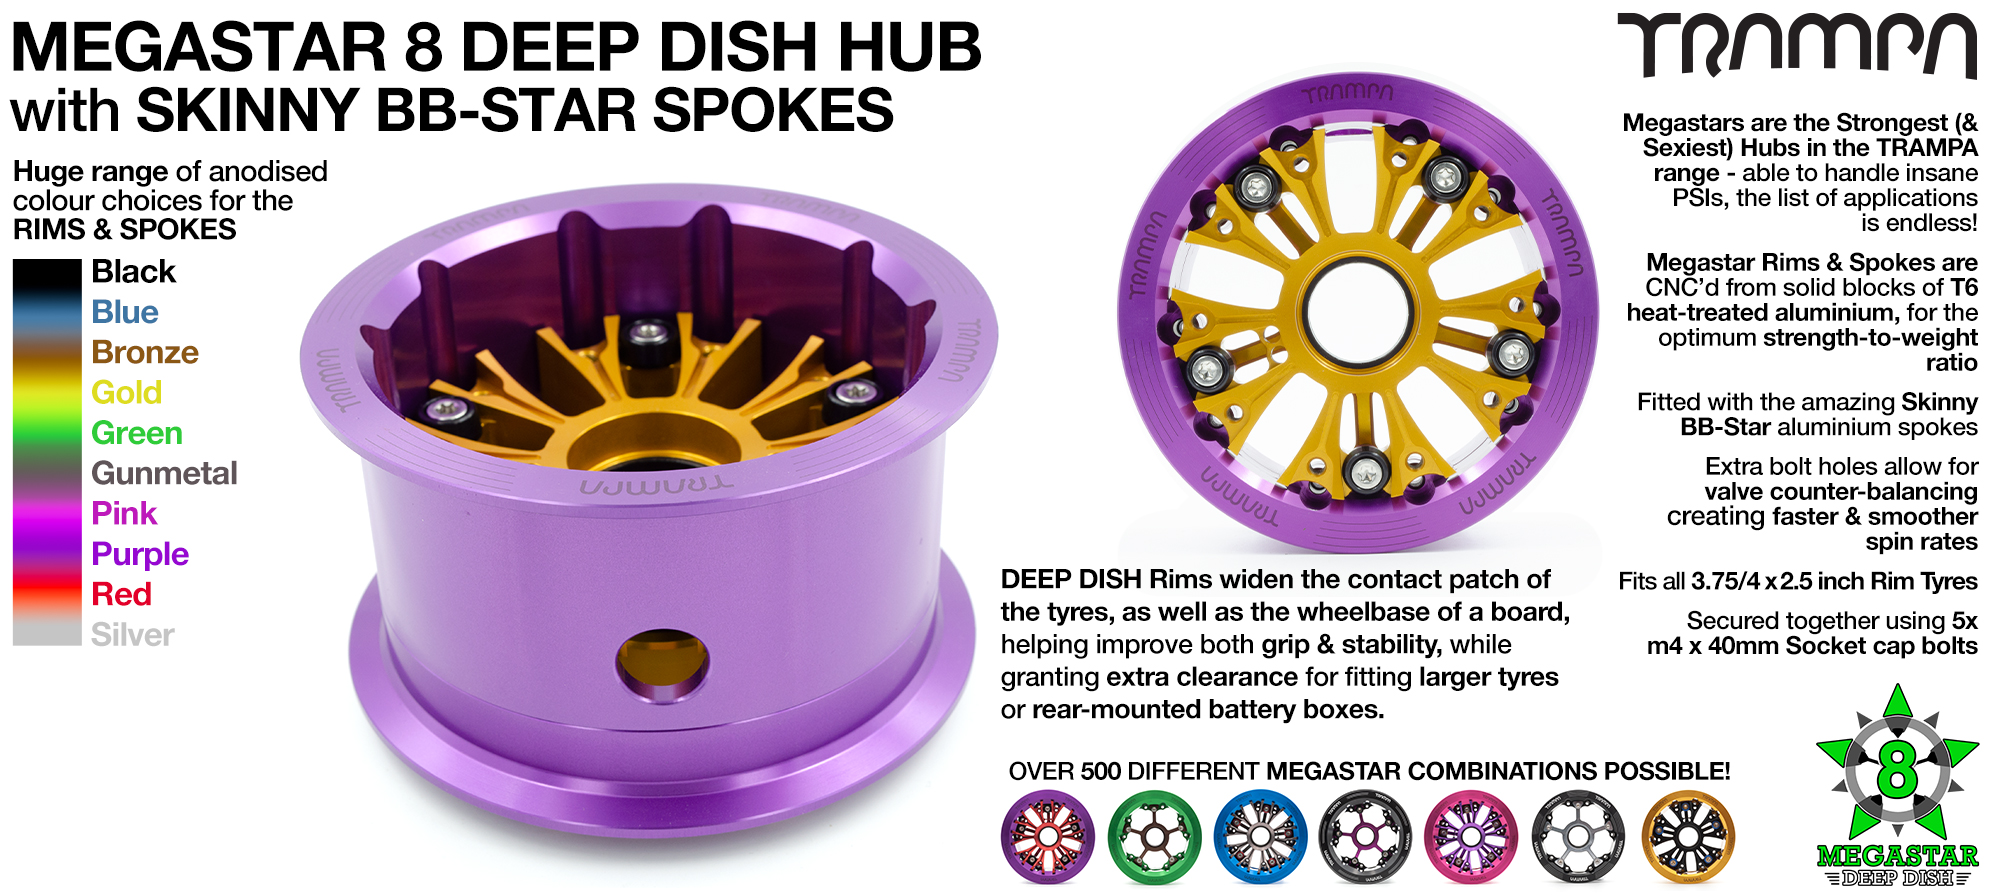 Deep-Dish MEGASTAR 8 PURPLE 3.75 x 2.5 Inch - Fits Pneumatic tyres up to 8 Inches in outer diameter 